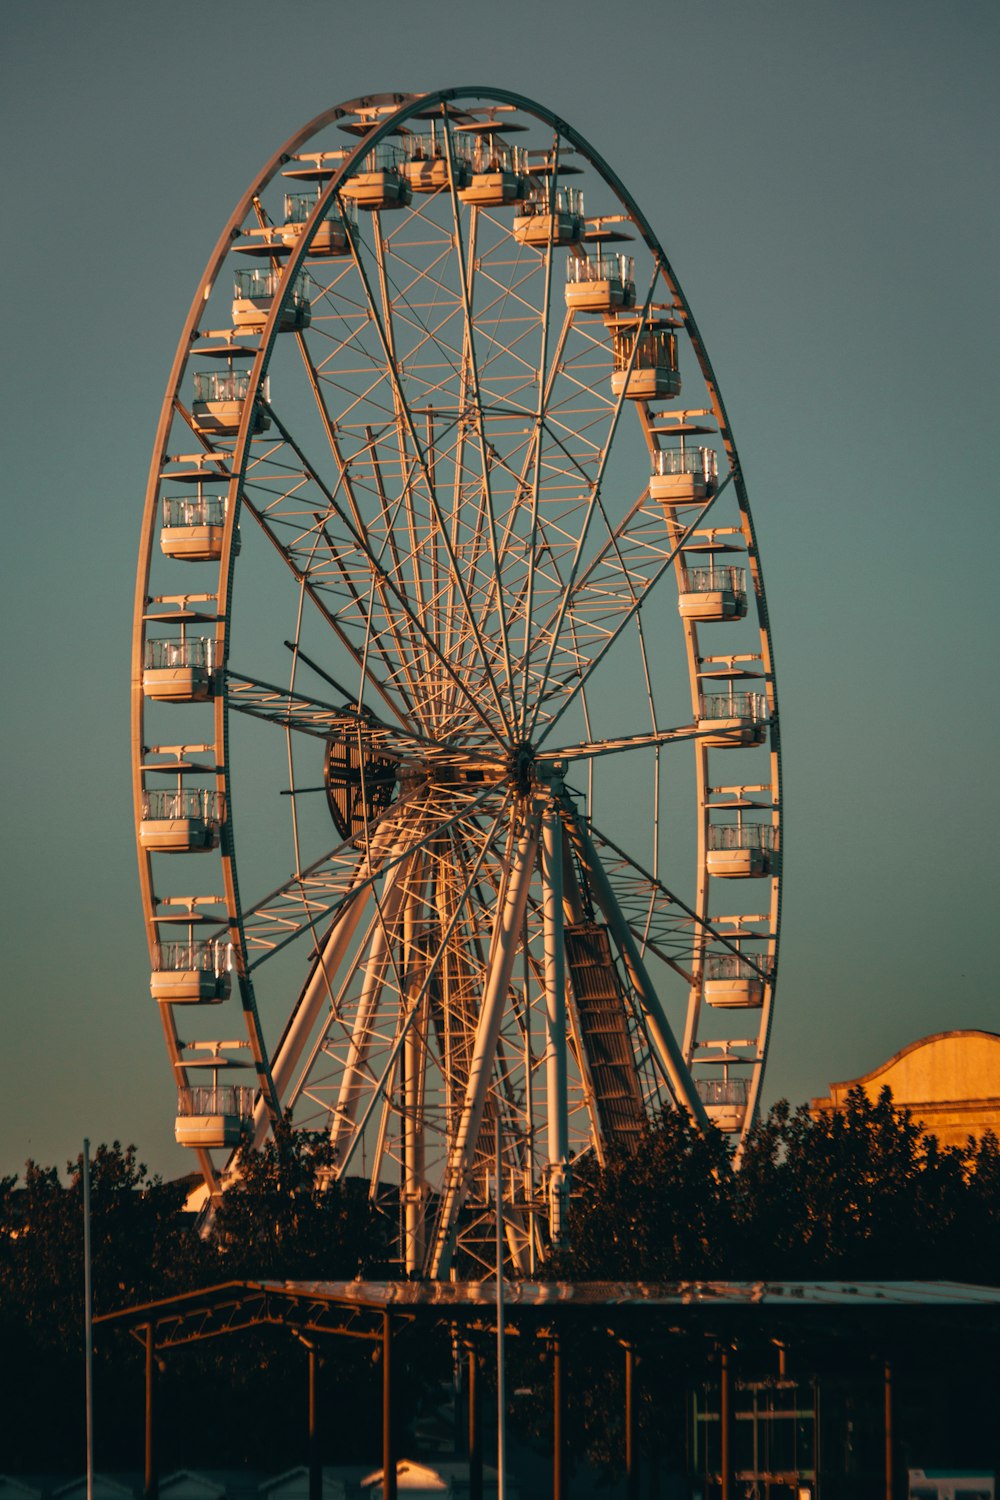 a large ferris wheel sitting in the middle of a park